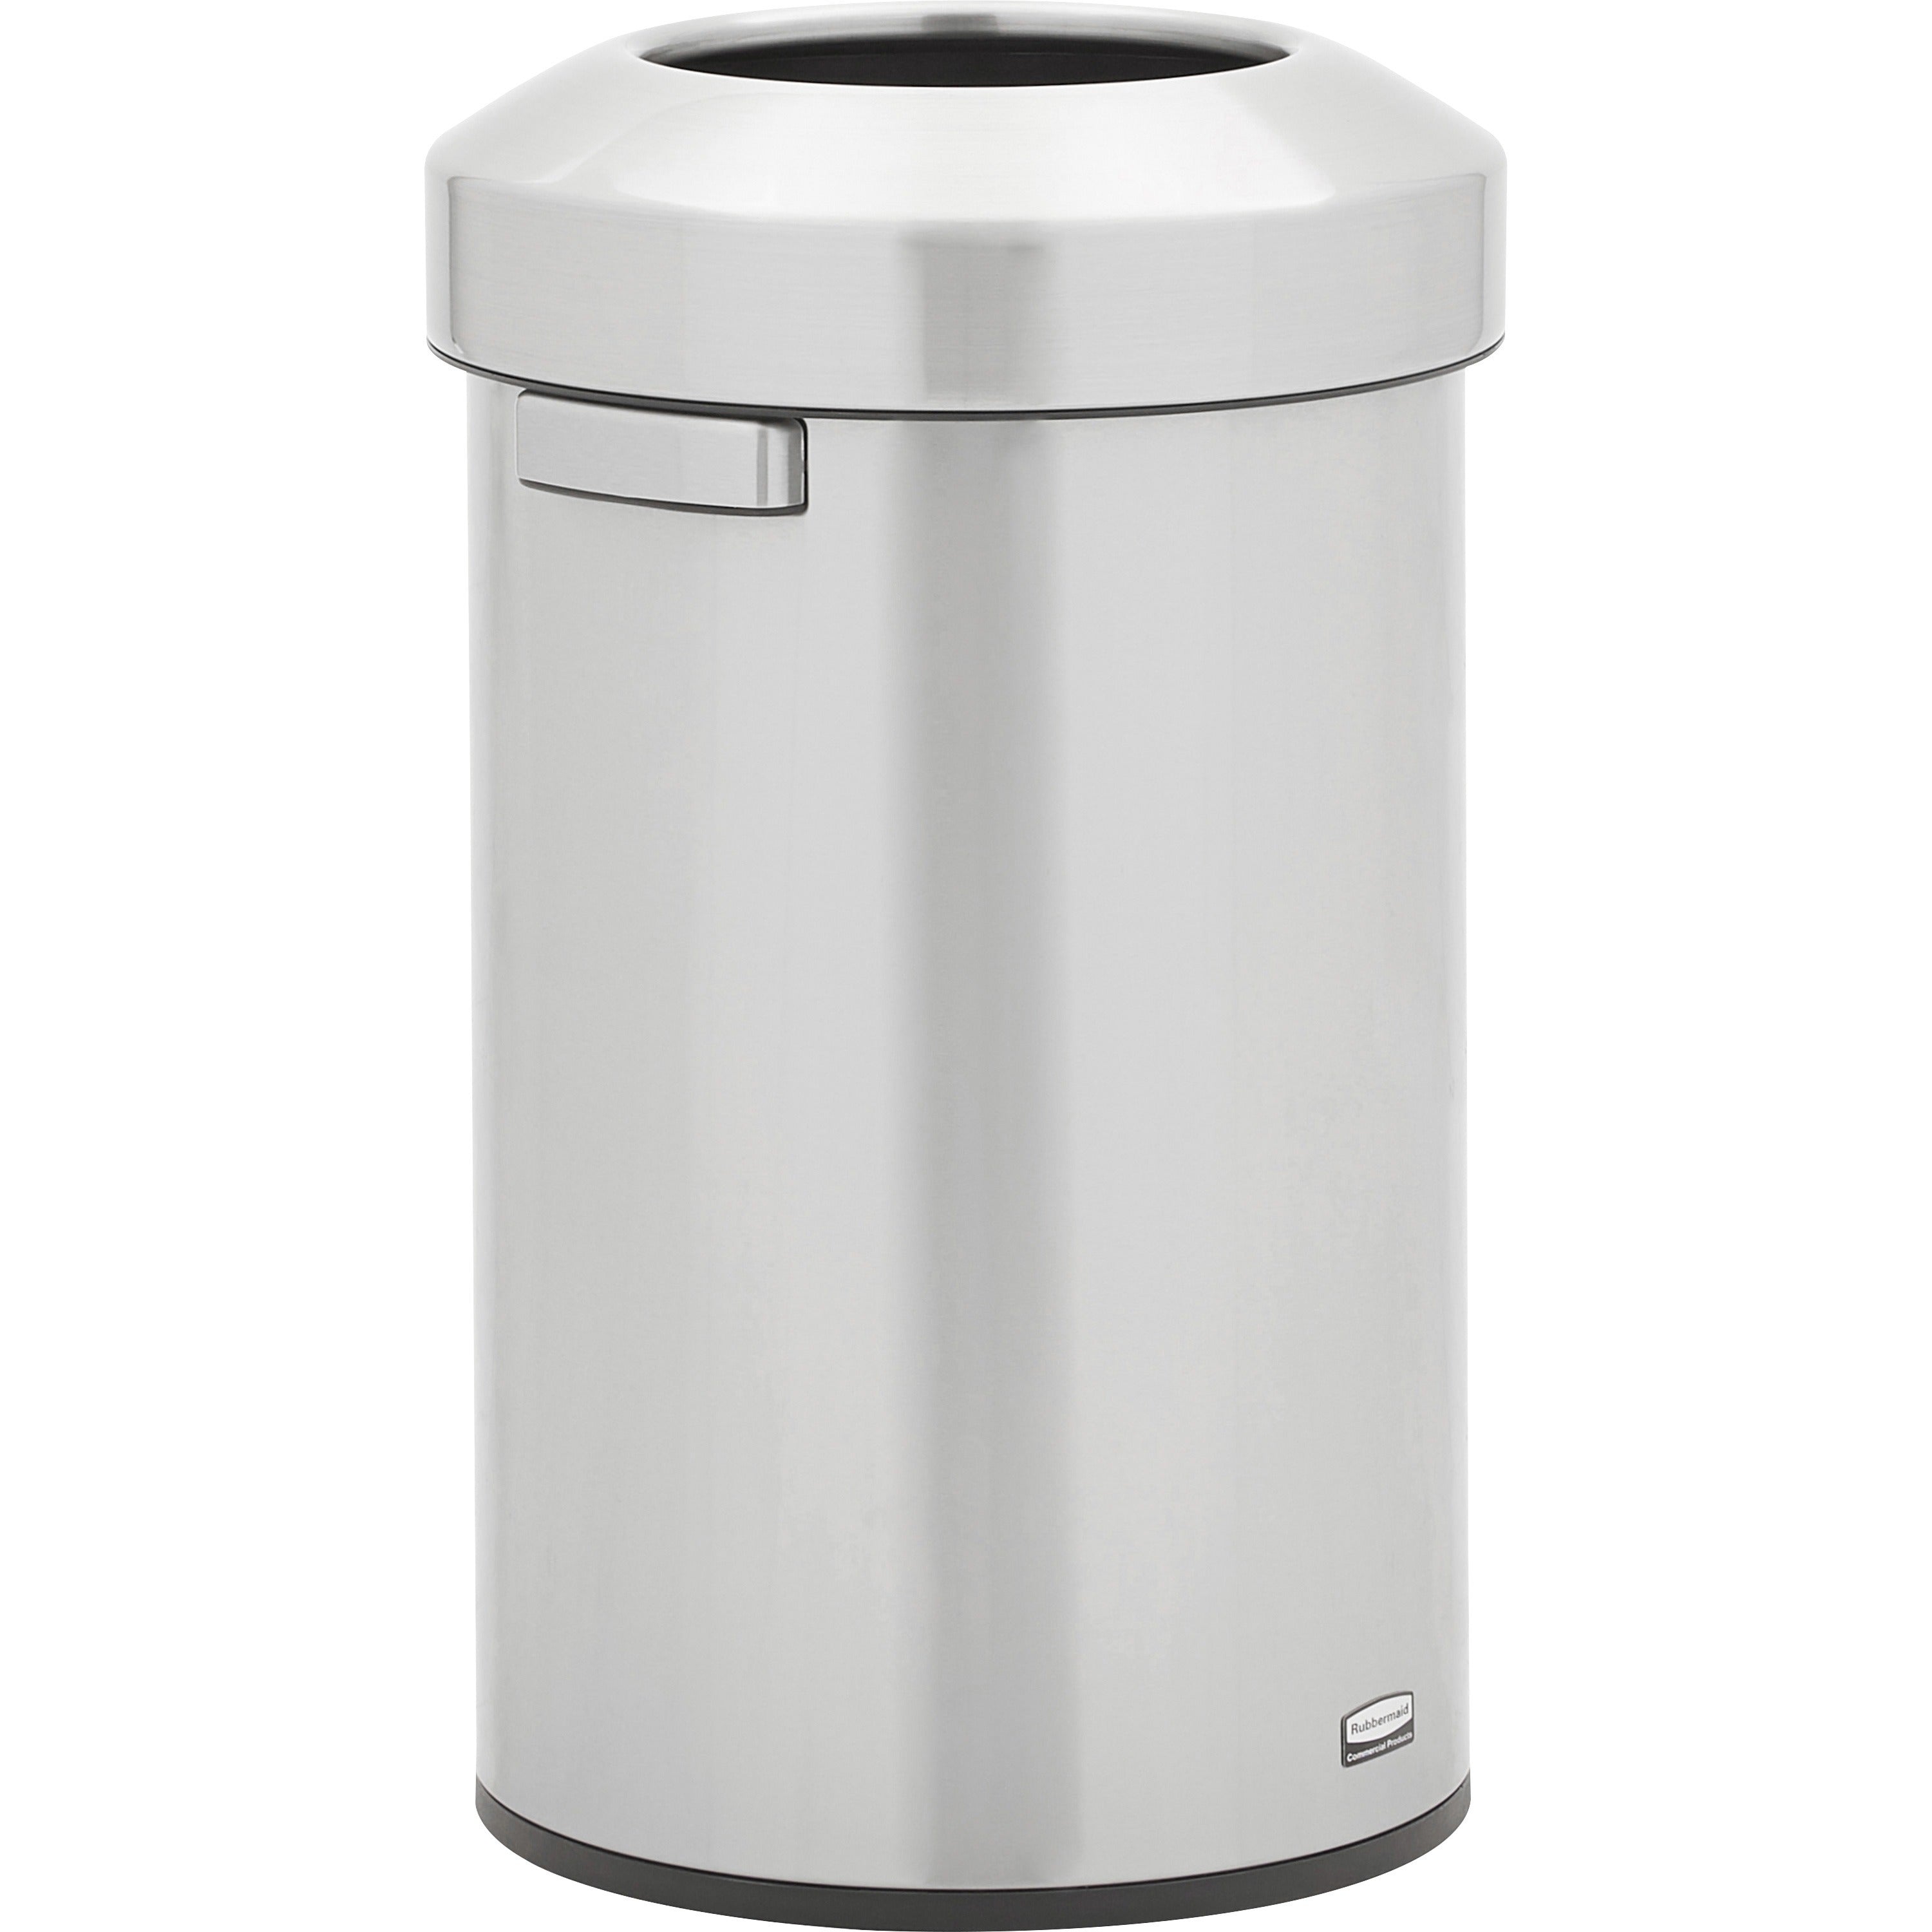 rubbermaid-commercial-refine-waste-container-16-gal-capacity-round-ergonomic-handle-non-skid-fingerprint-resistant-durable-263-height-x-159-width-metal-stainless-steel-1-each_rcp2147583 - 2